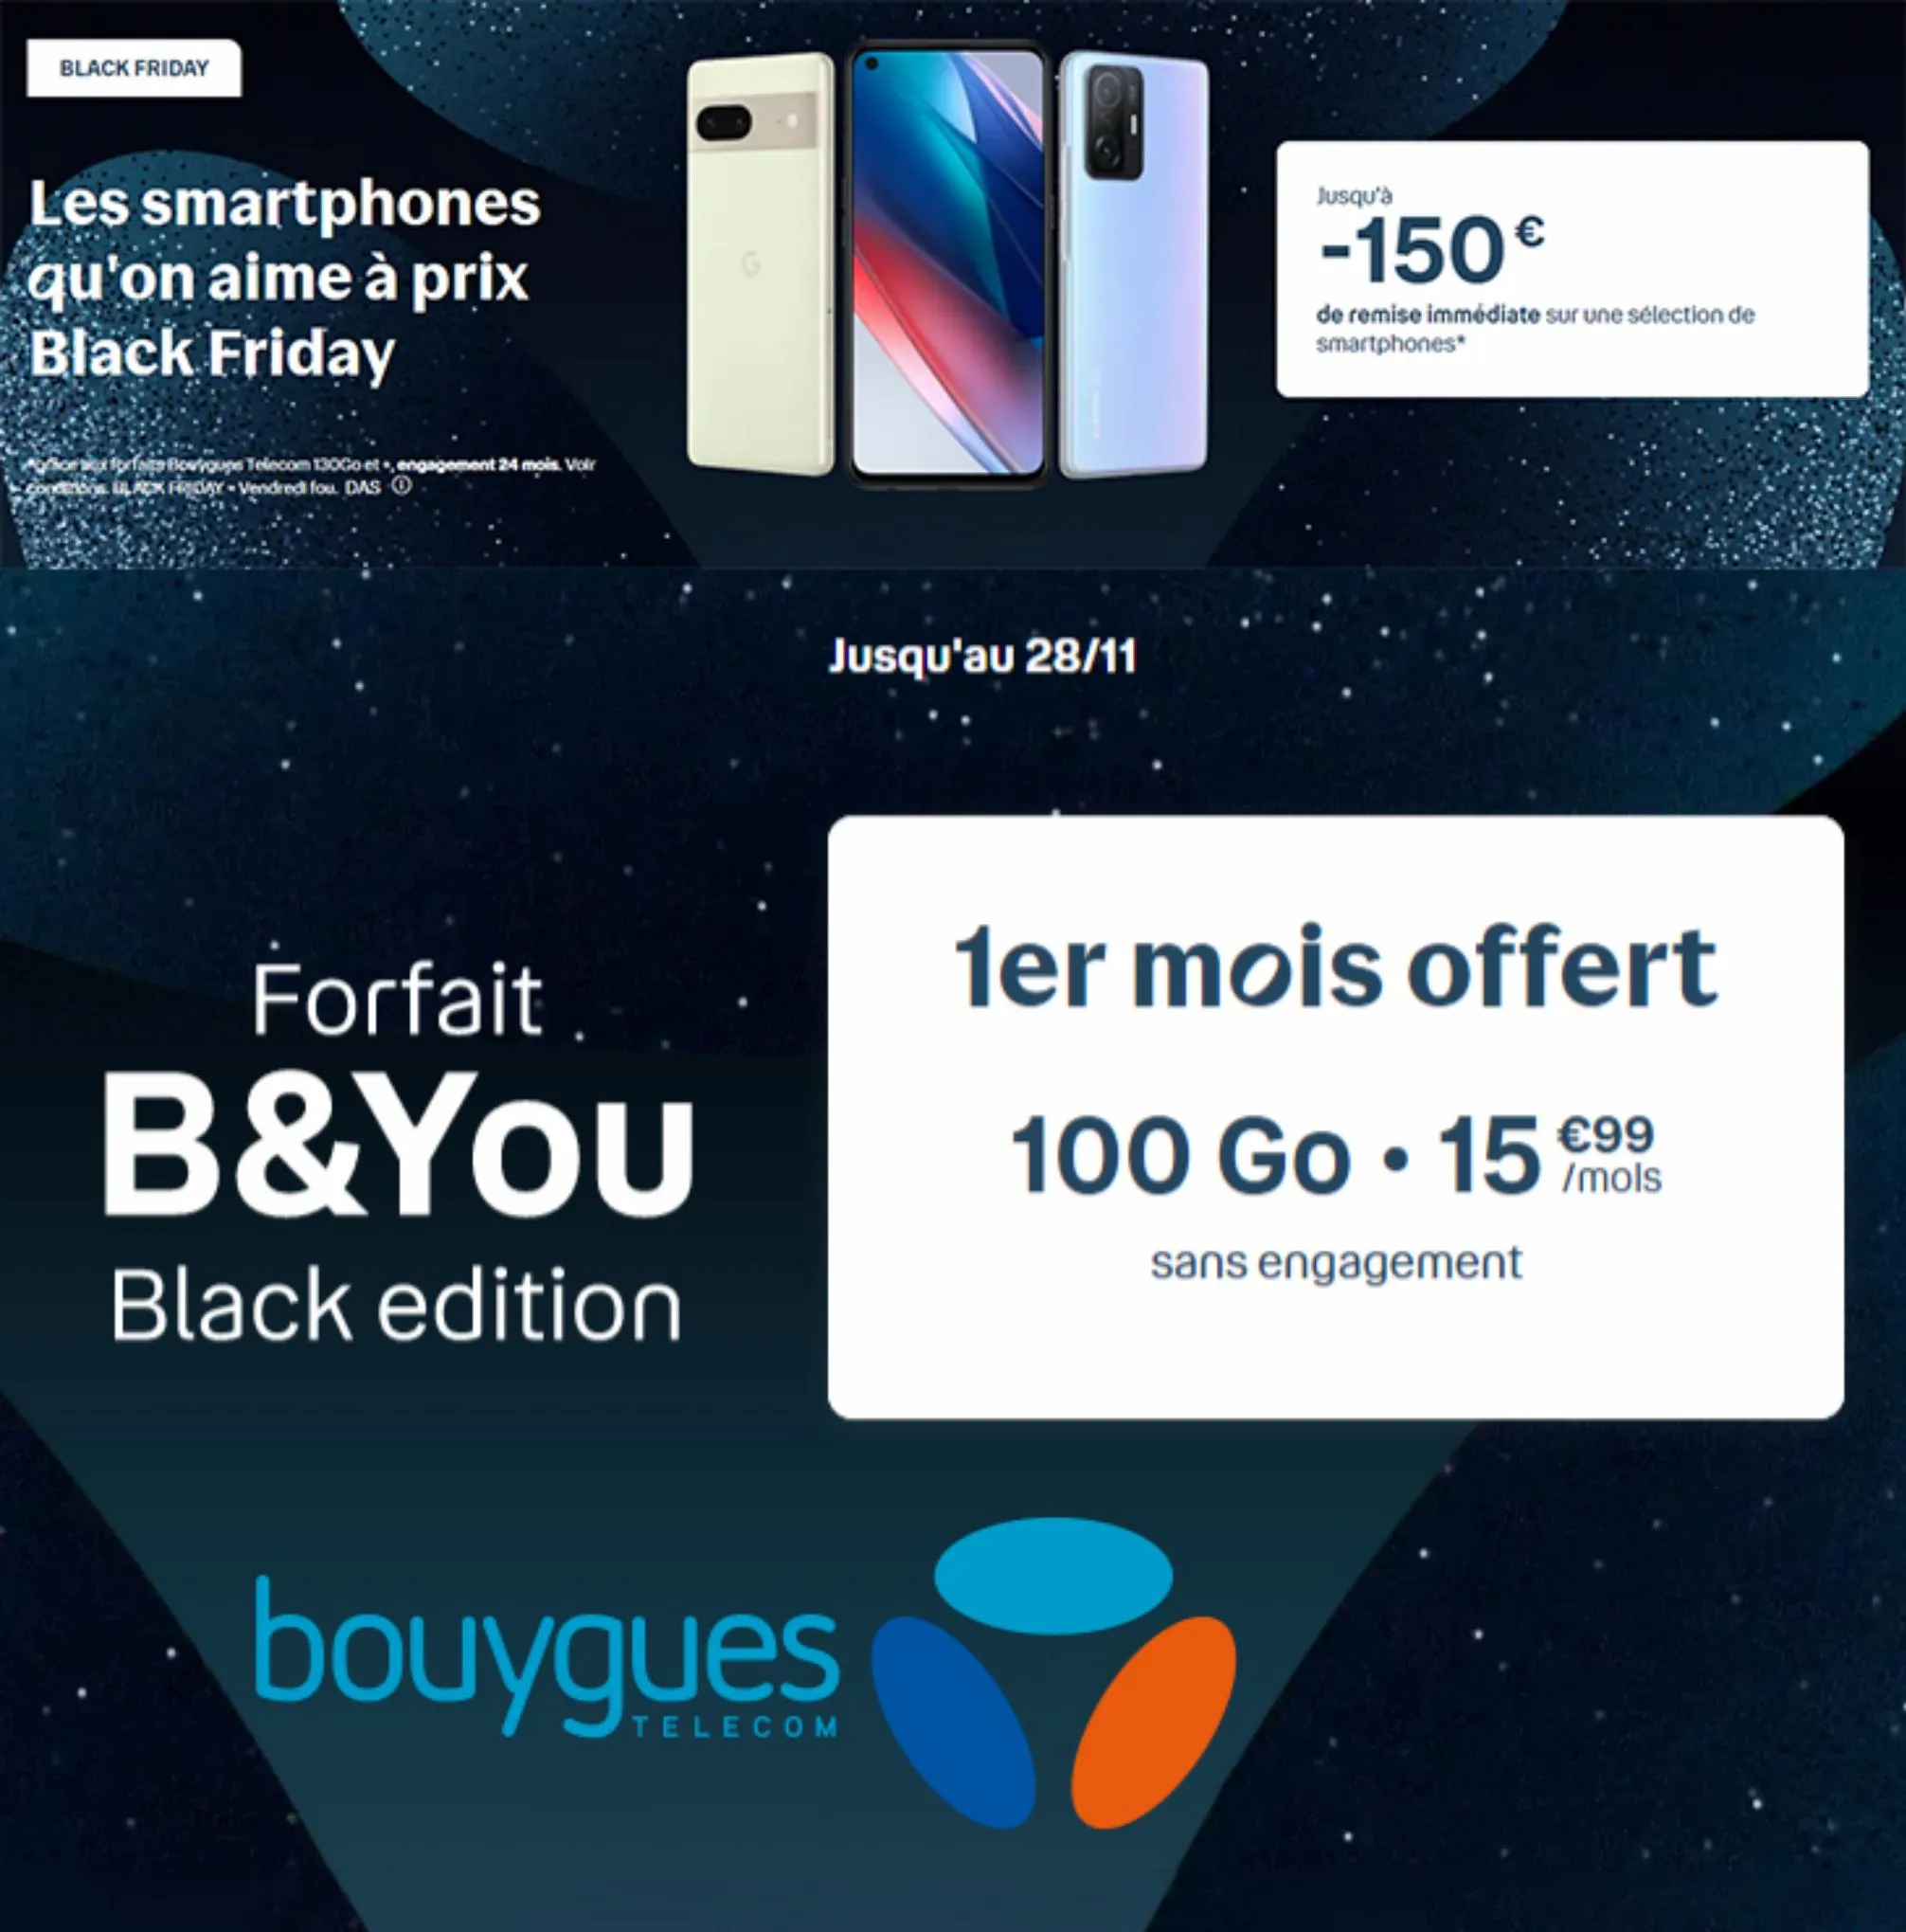 Catalogue Offres Bouygues Telecom Black Friday, page 00001